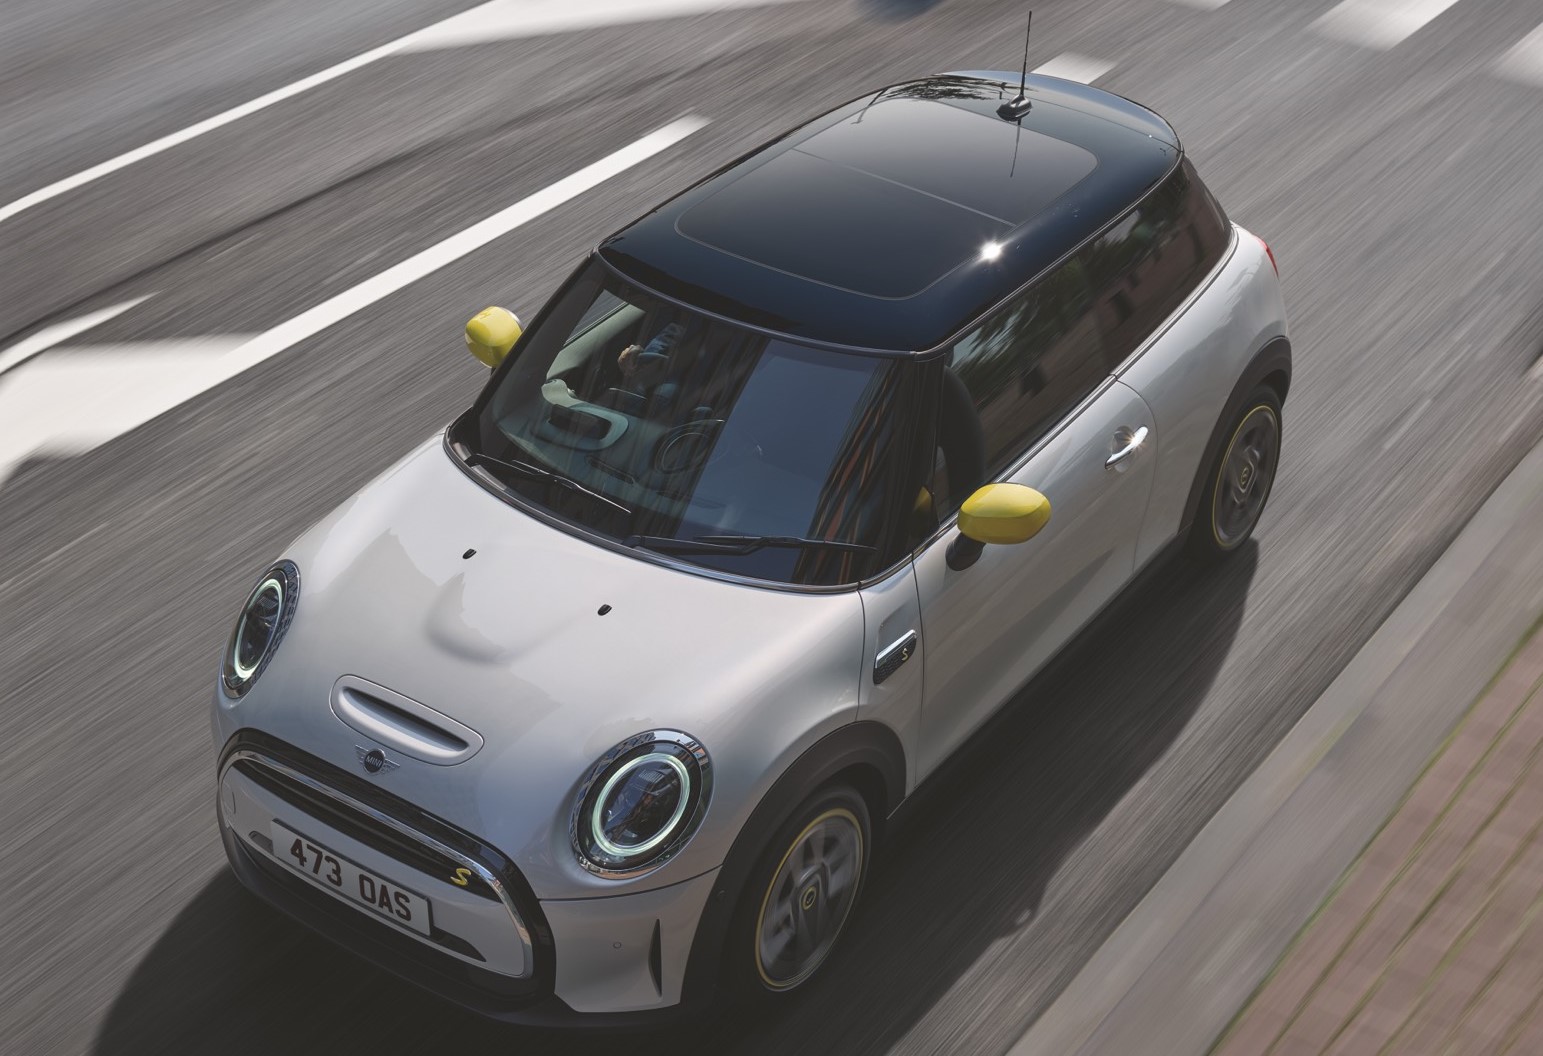 MINI Electric makes your money go further